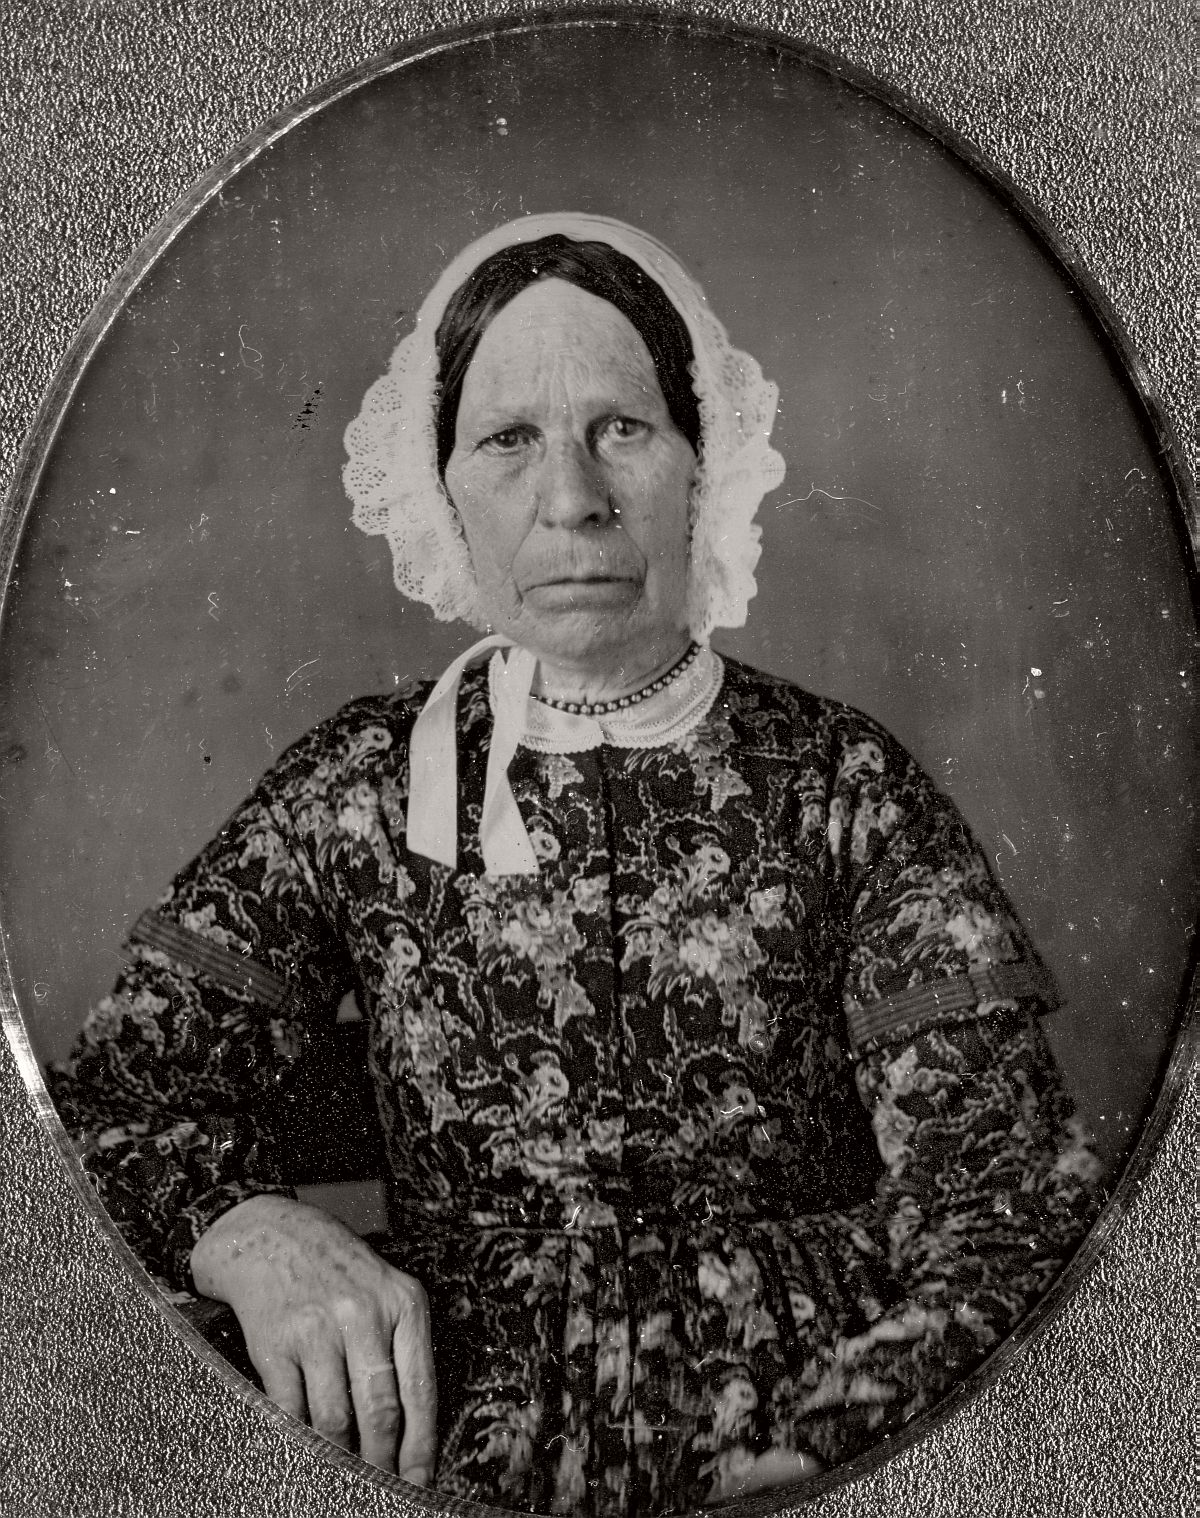 Daguerreotype Portraits Of People Born In The Late 18th